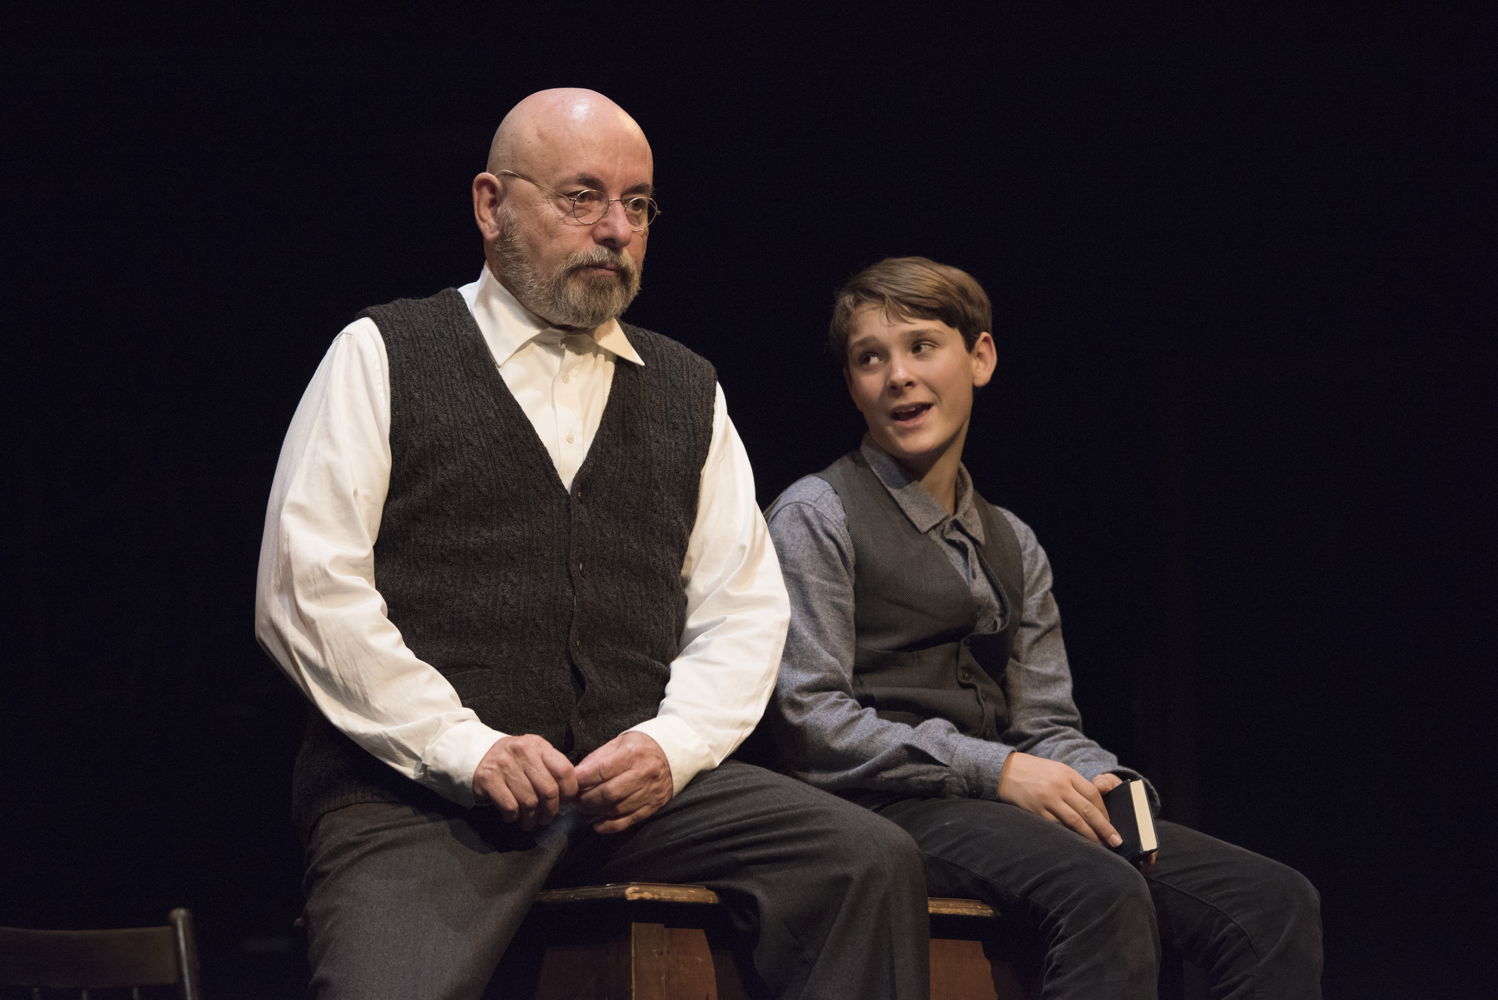 Paul Rainville and Simeon Sanford Blades in The Children’s Republic by Hannah Moscovitch / Photos by David Cooper